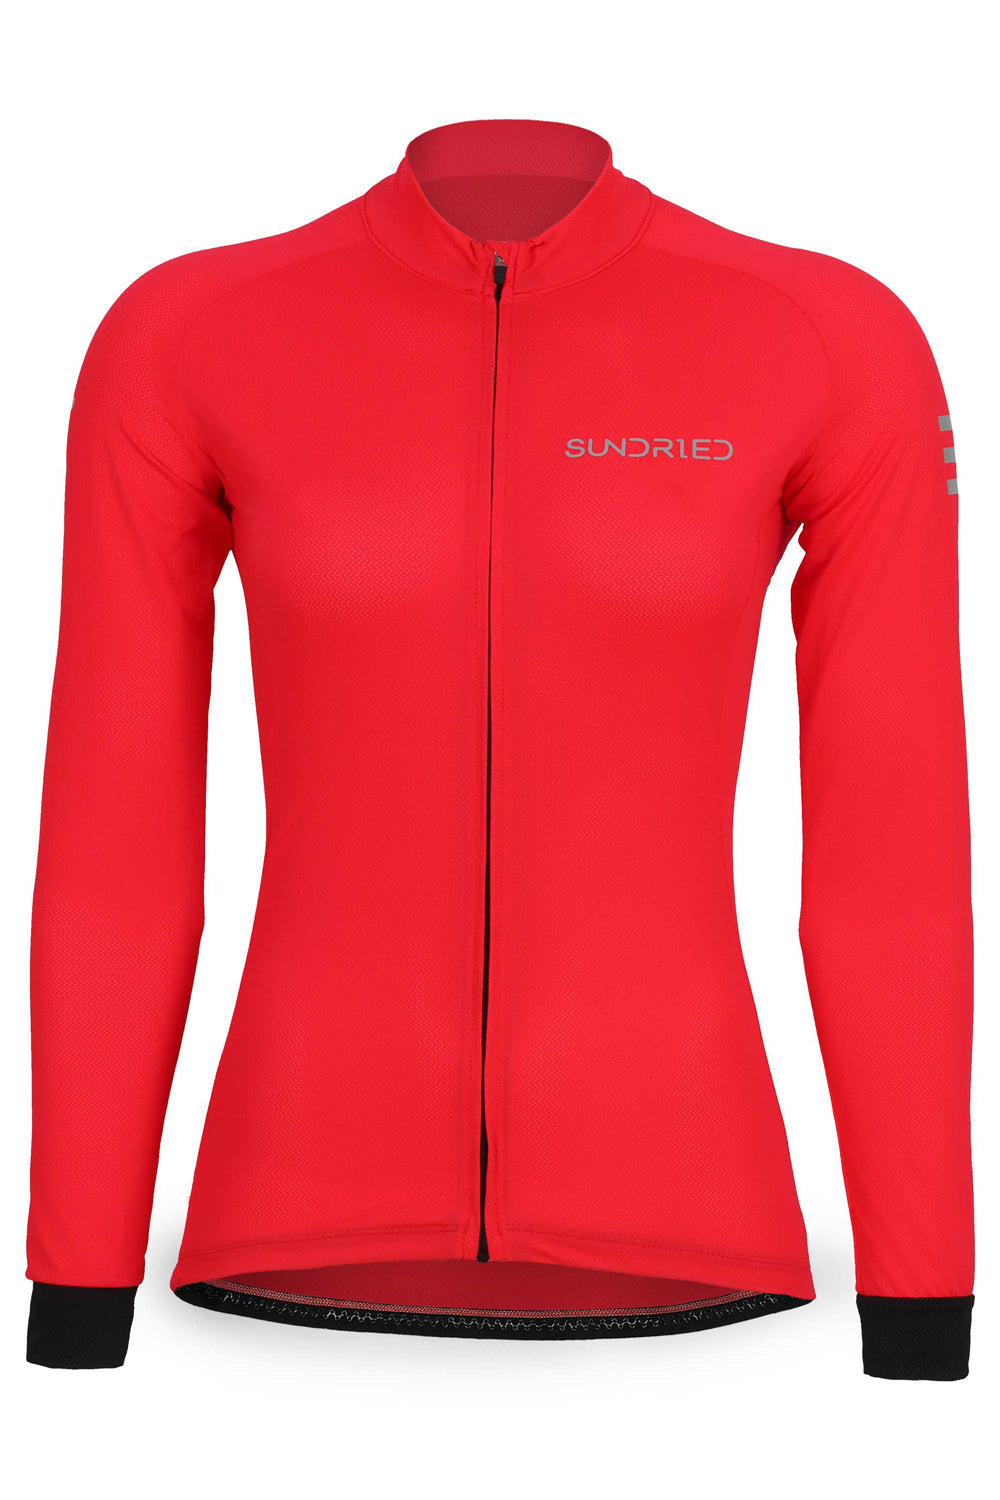 Sundried Apex Women's Long Sleeve Cycle Jersey Long Sleeve Jersey XS Red SD0446 XS Red Activewear